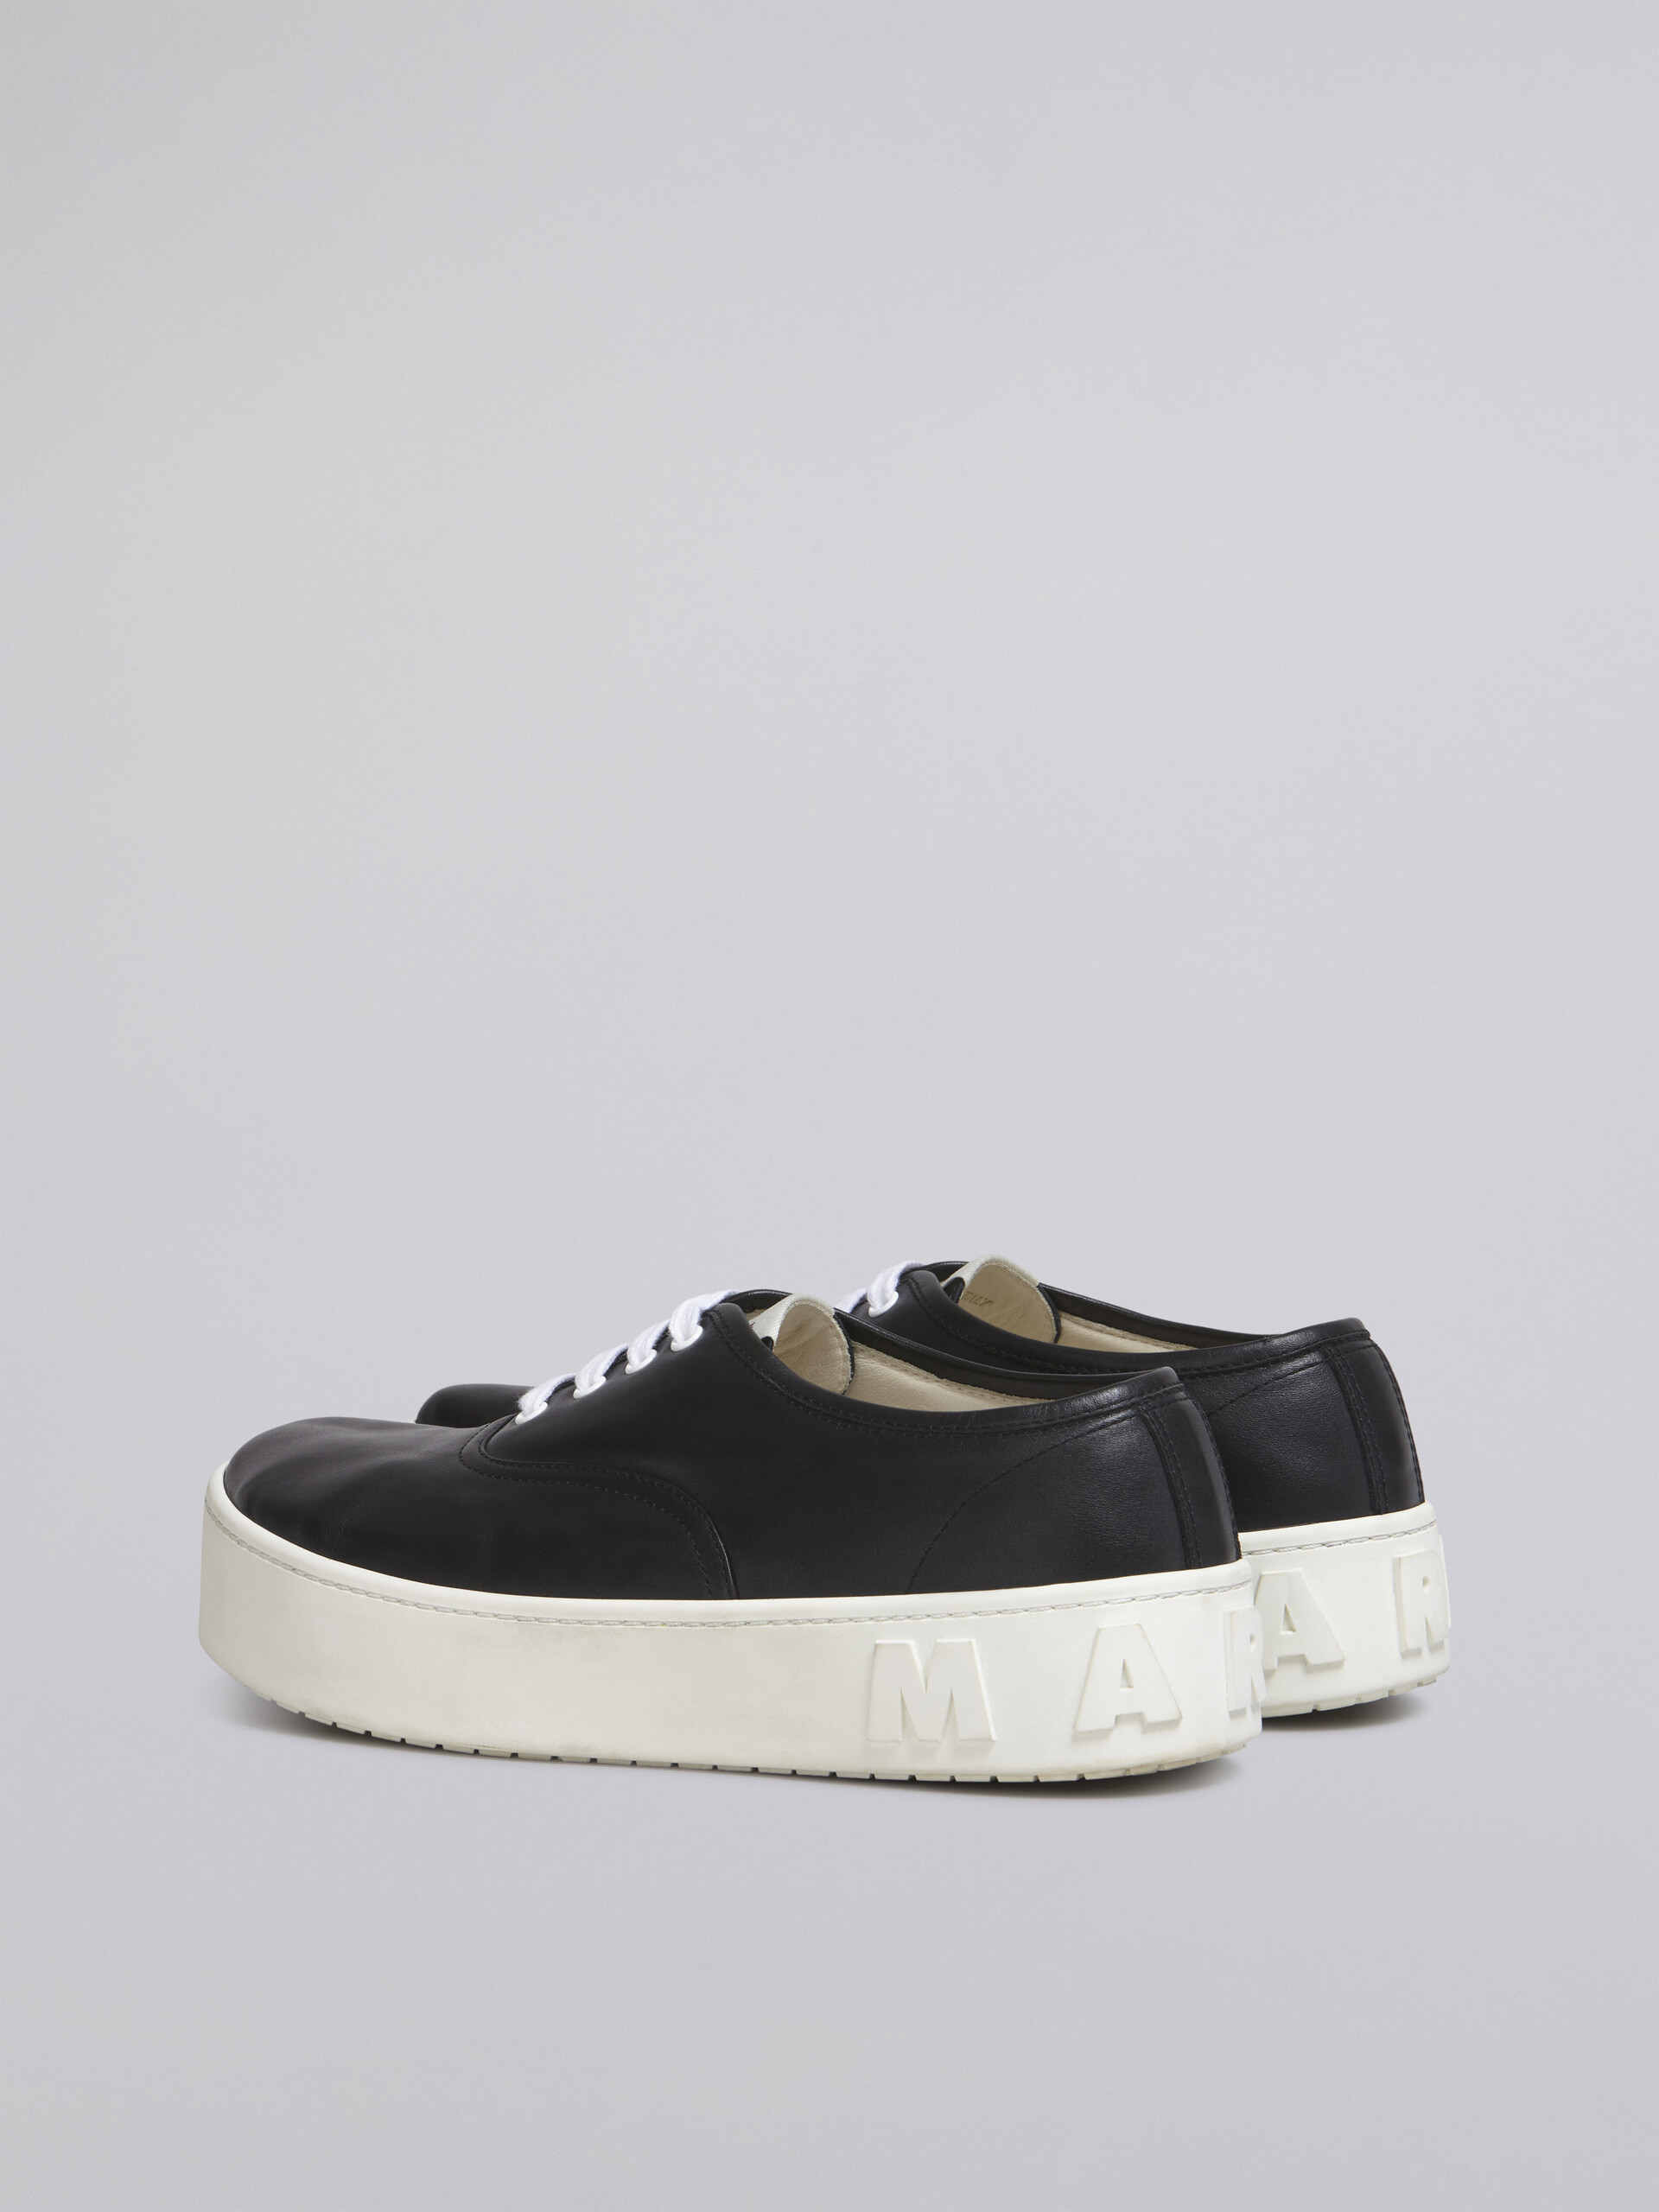 Black leather sneaker with maxi logo - Sneakers - Image 3